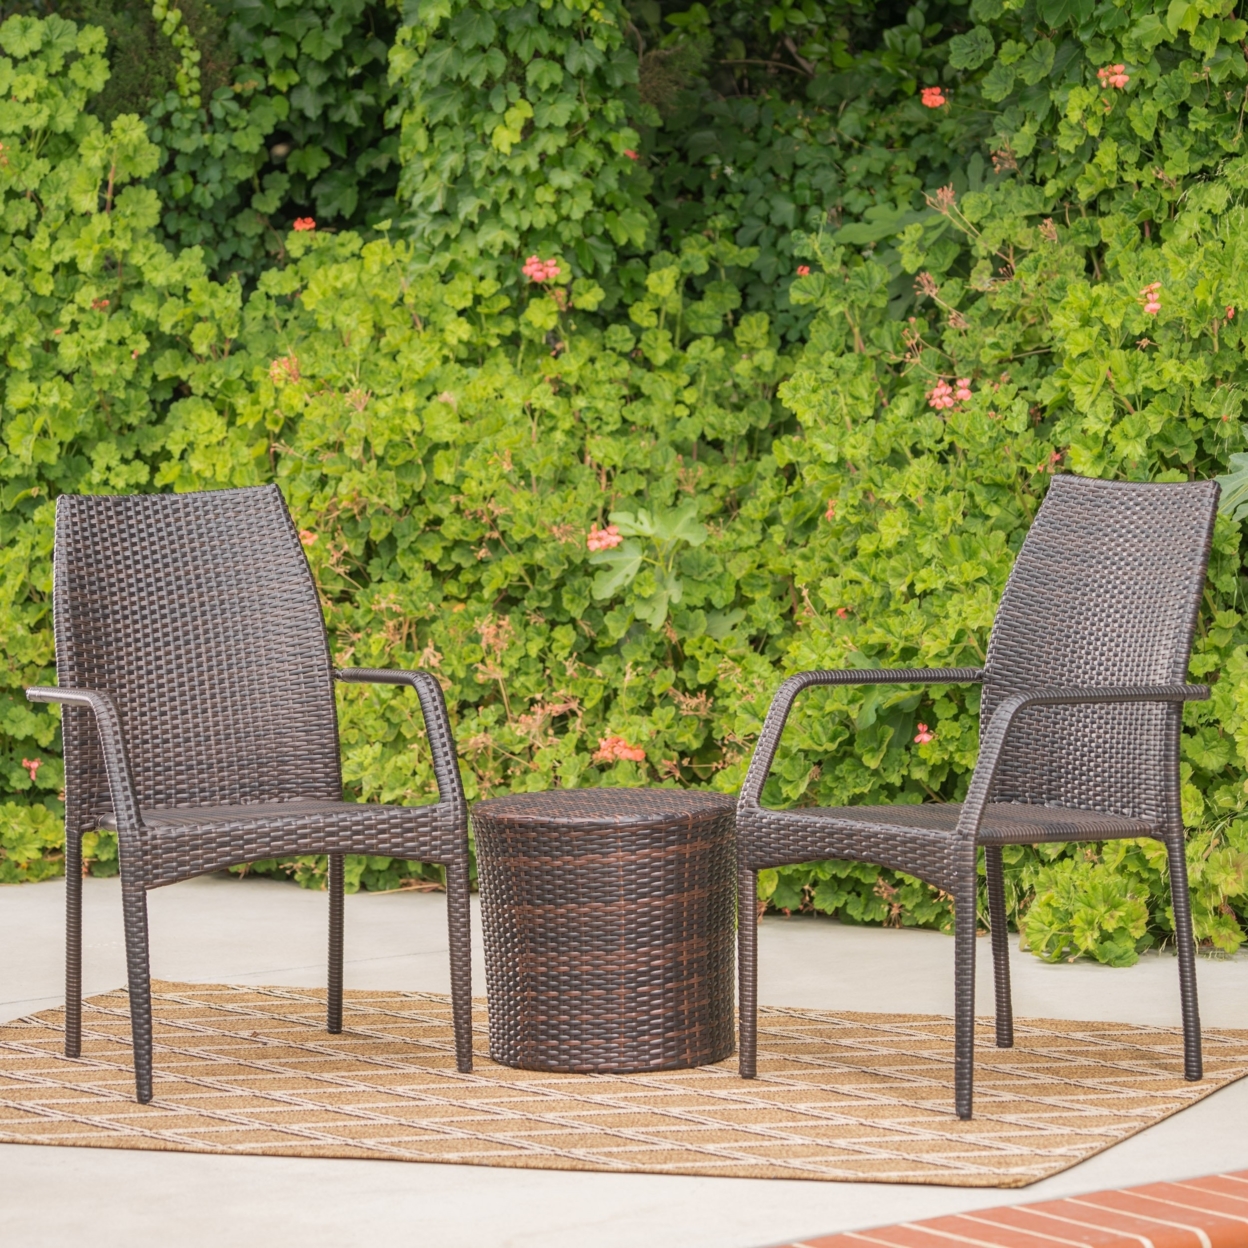 Dawson Outdoor 3 Piece Multi-brown Wicker Stacking Chair Chat Set - Cylindrical Table, Brown